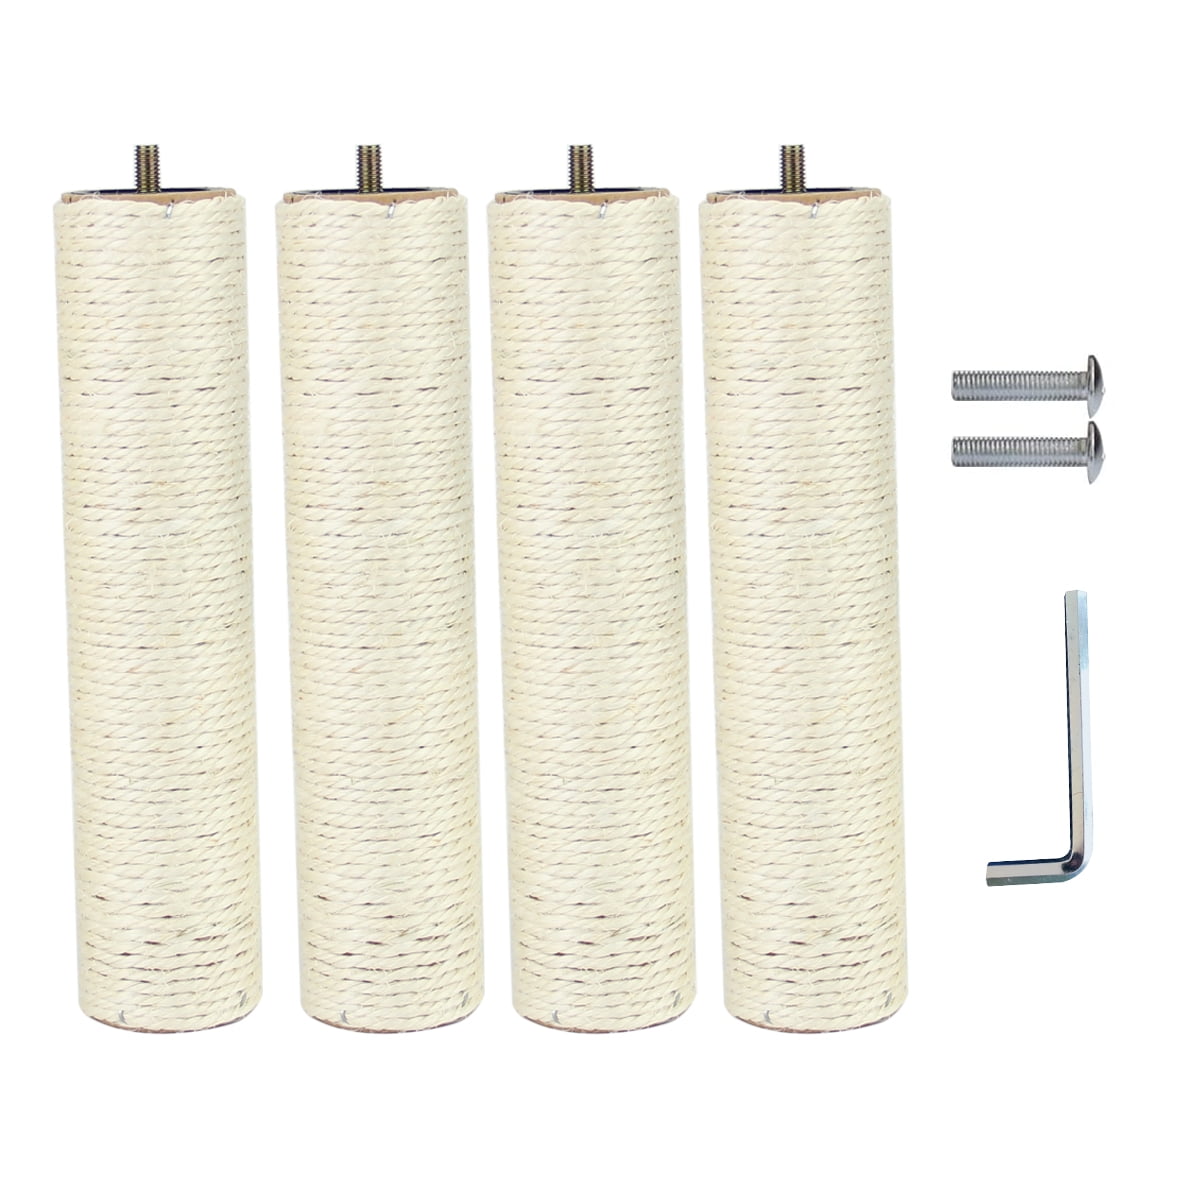 2 Packs, 11.8 Tall Hemp Rope Scratcher Posts for Indoor Kittens and Large Cats with Screws Cat Scratching Post Replacement,Cat Tree Scratch Post Refill Pole Parts 